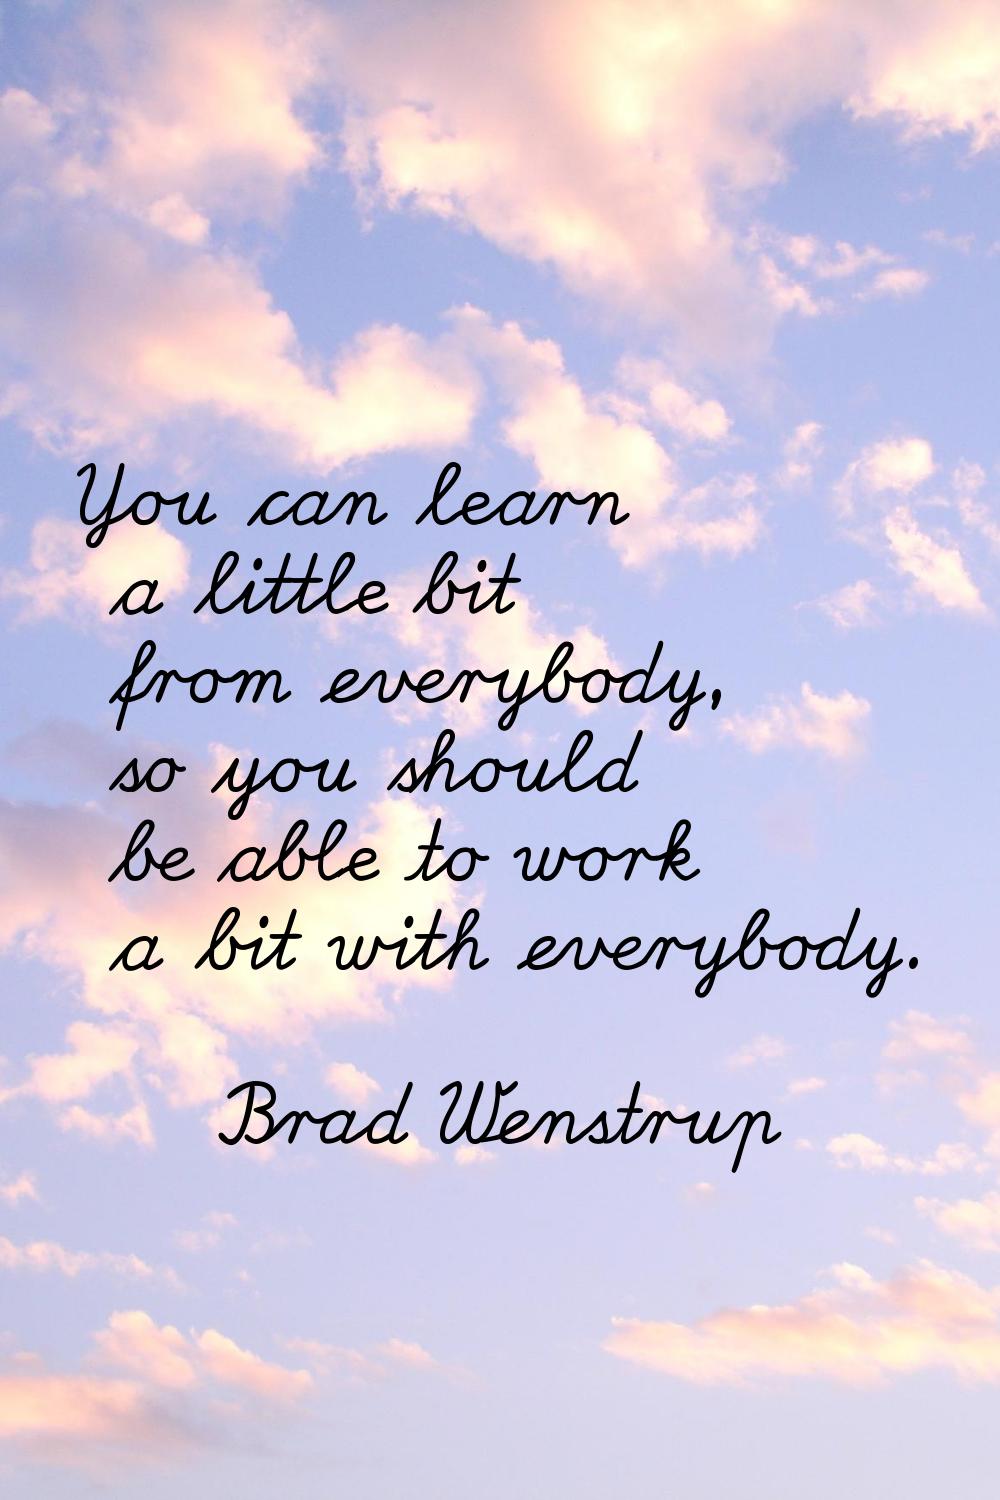 You can learn a little bit from everybody, so you should be able to work a bit with everybody.